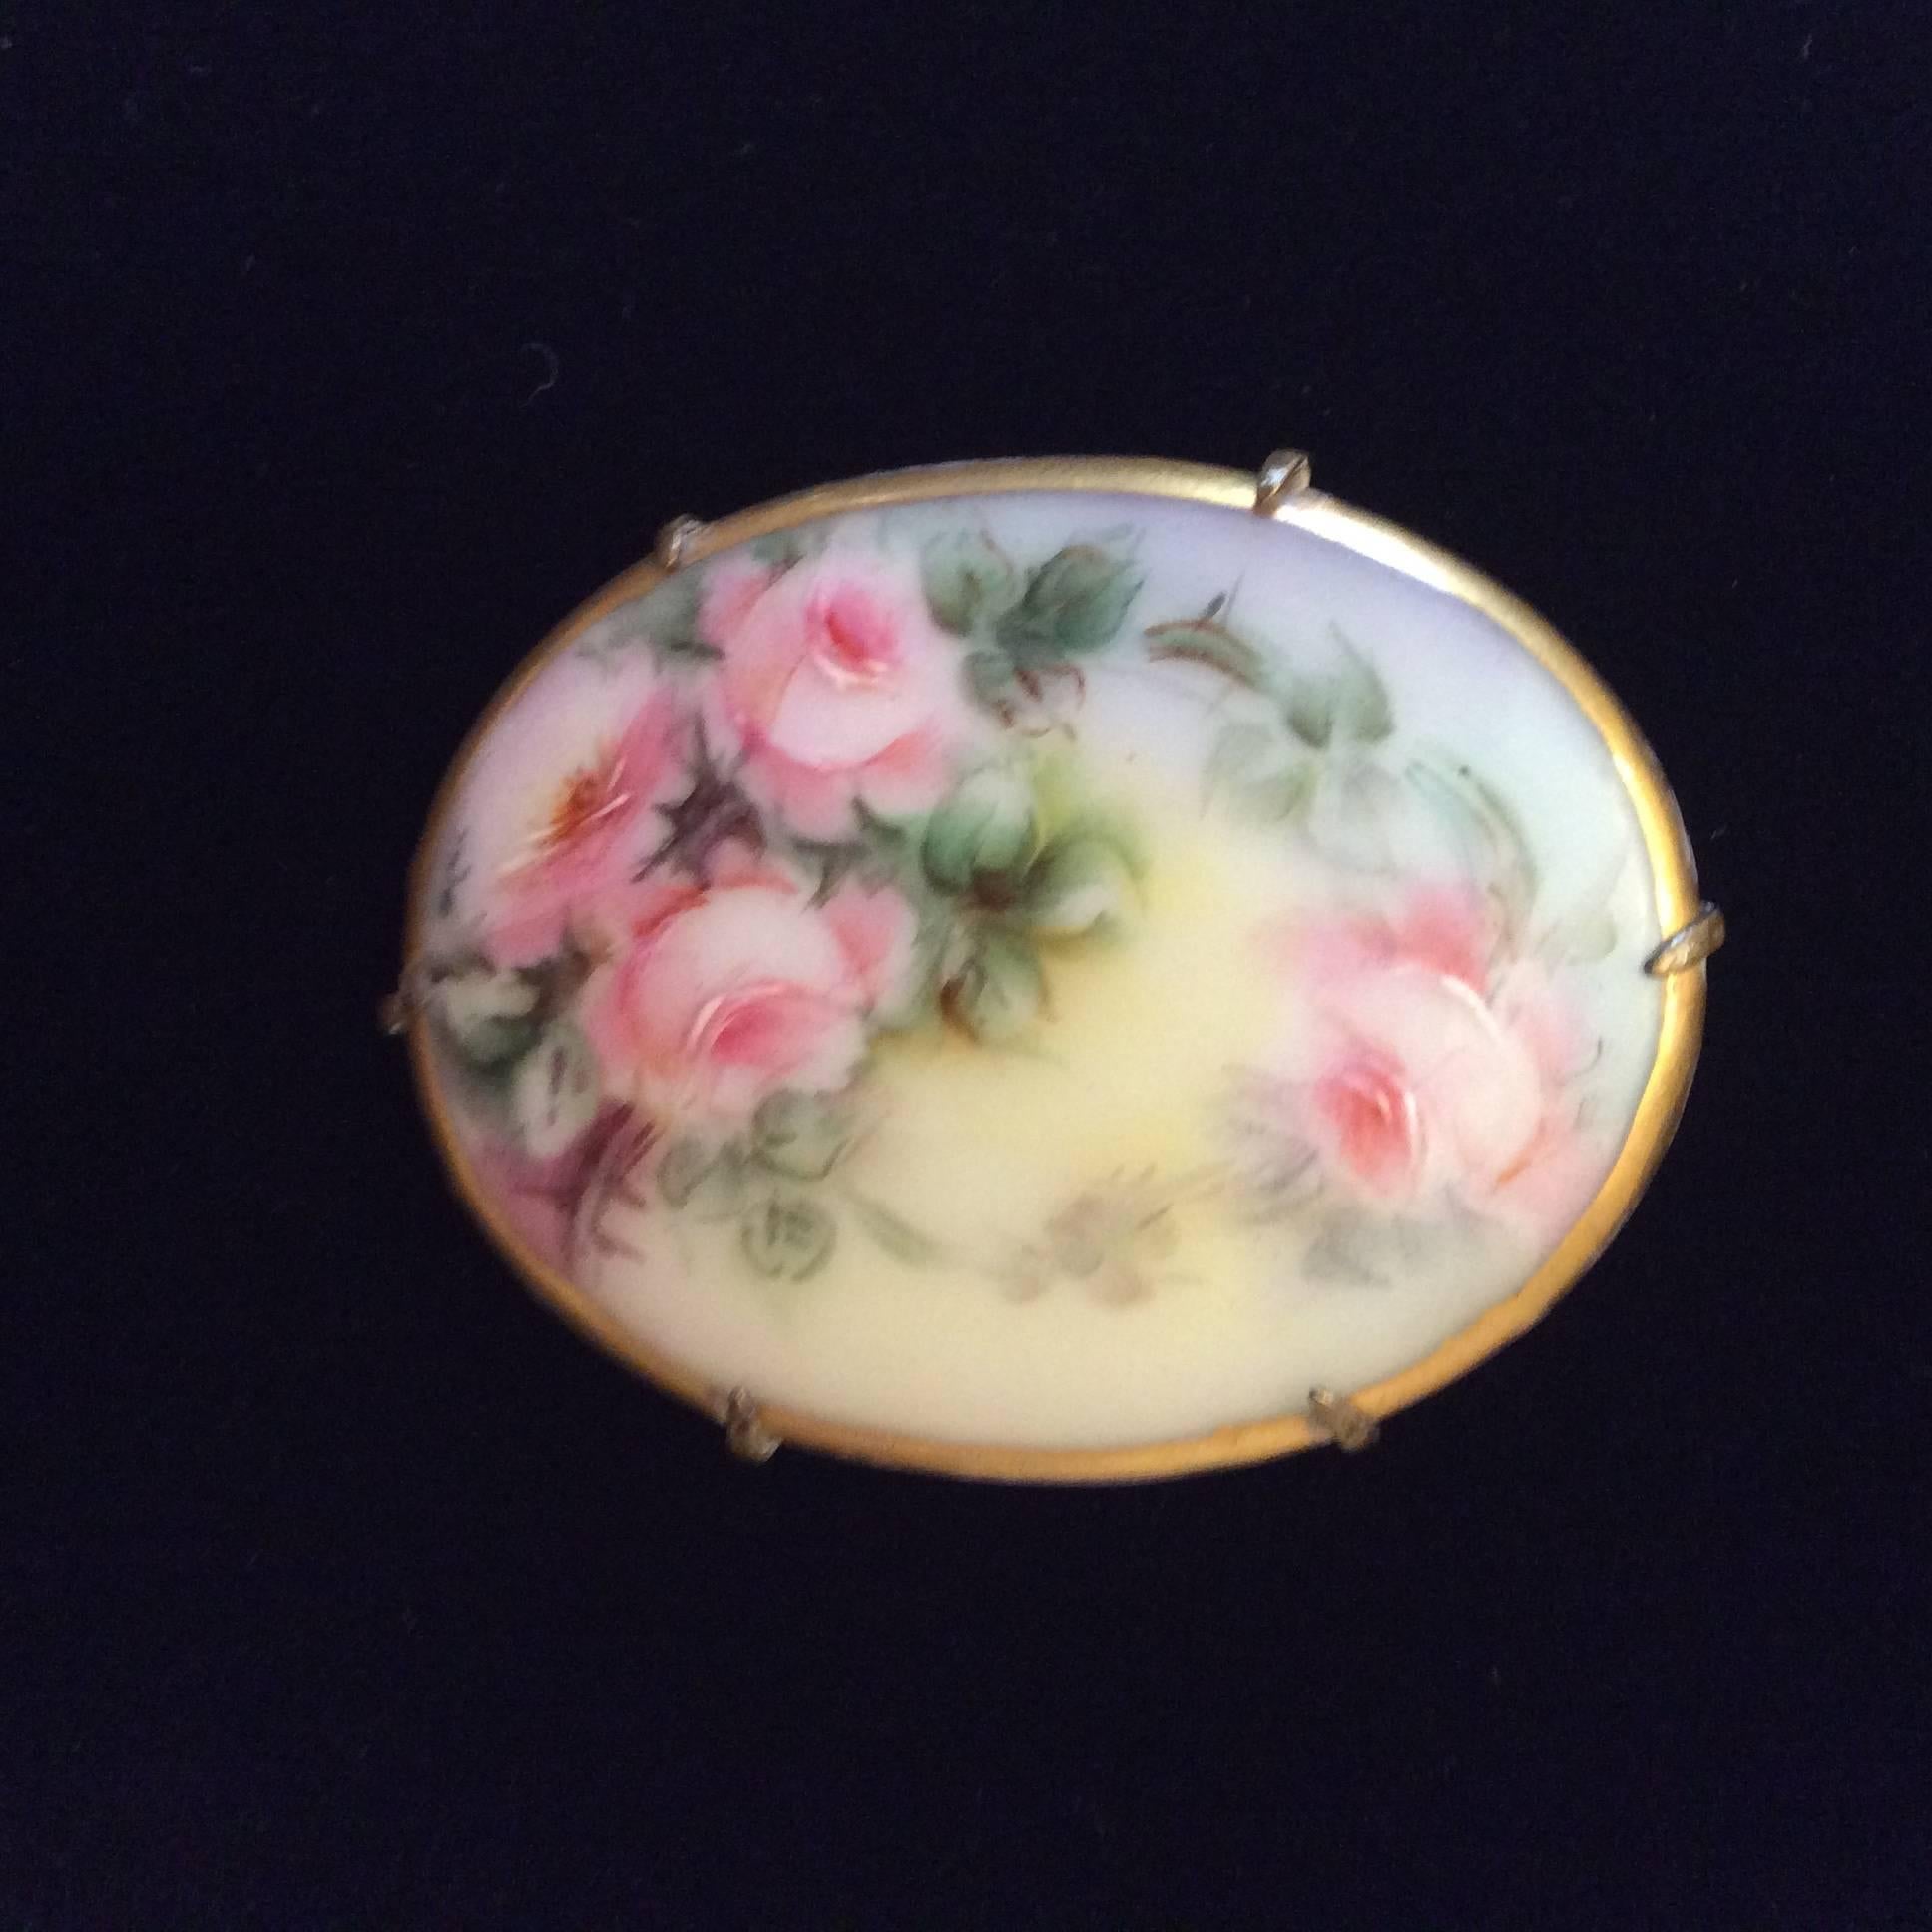 1920's  Brooch and Earring Set - Porcelain - Handpainted - Rare For Sale 4